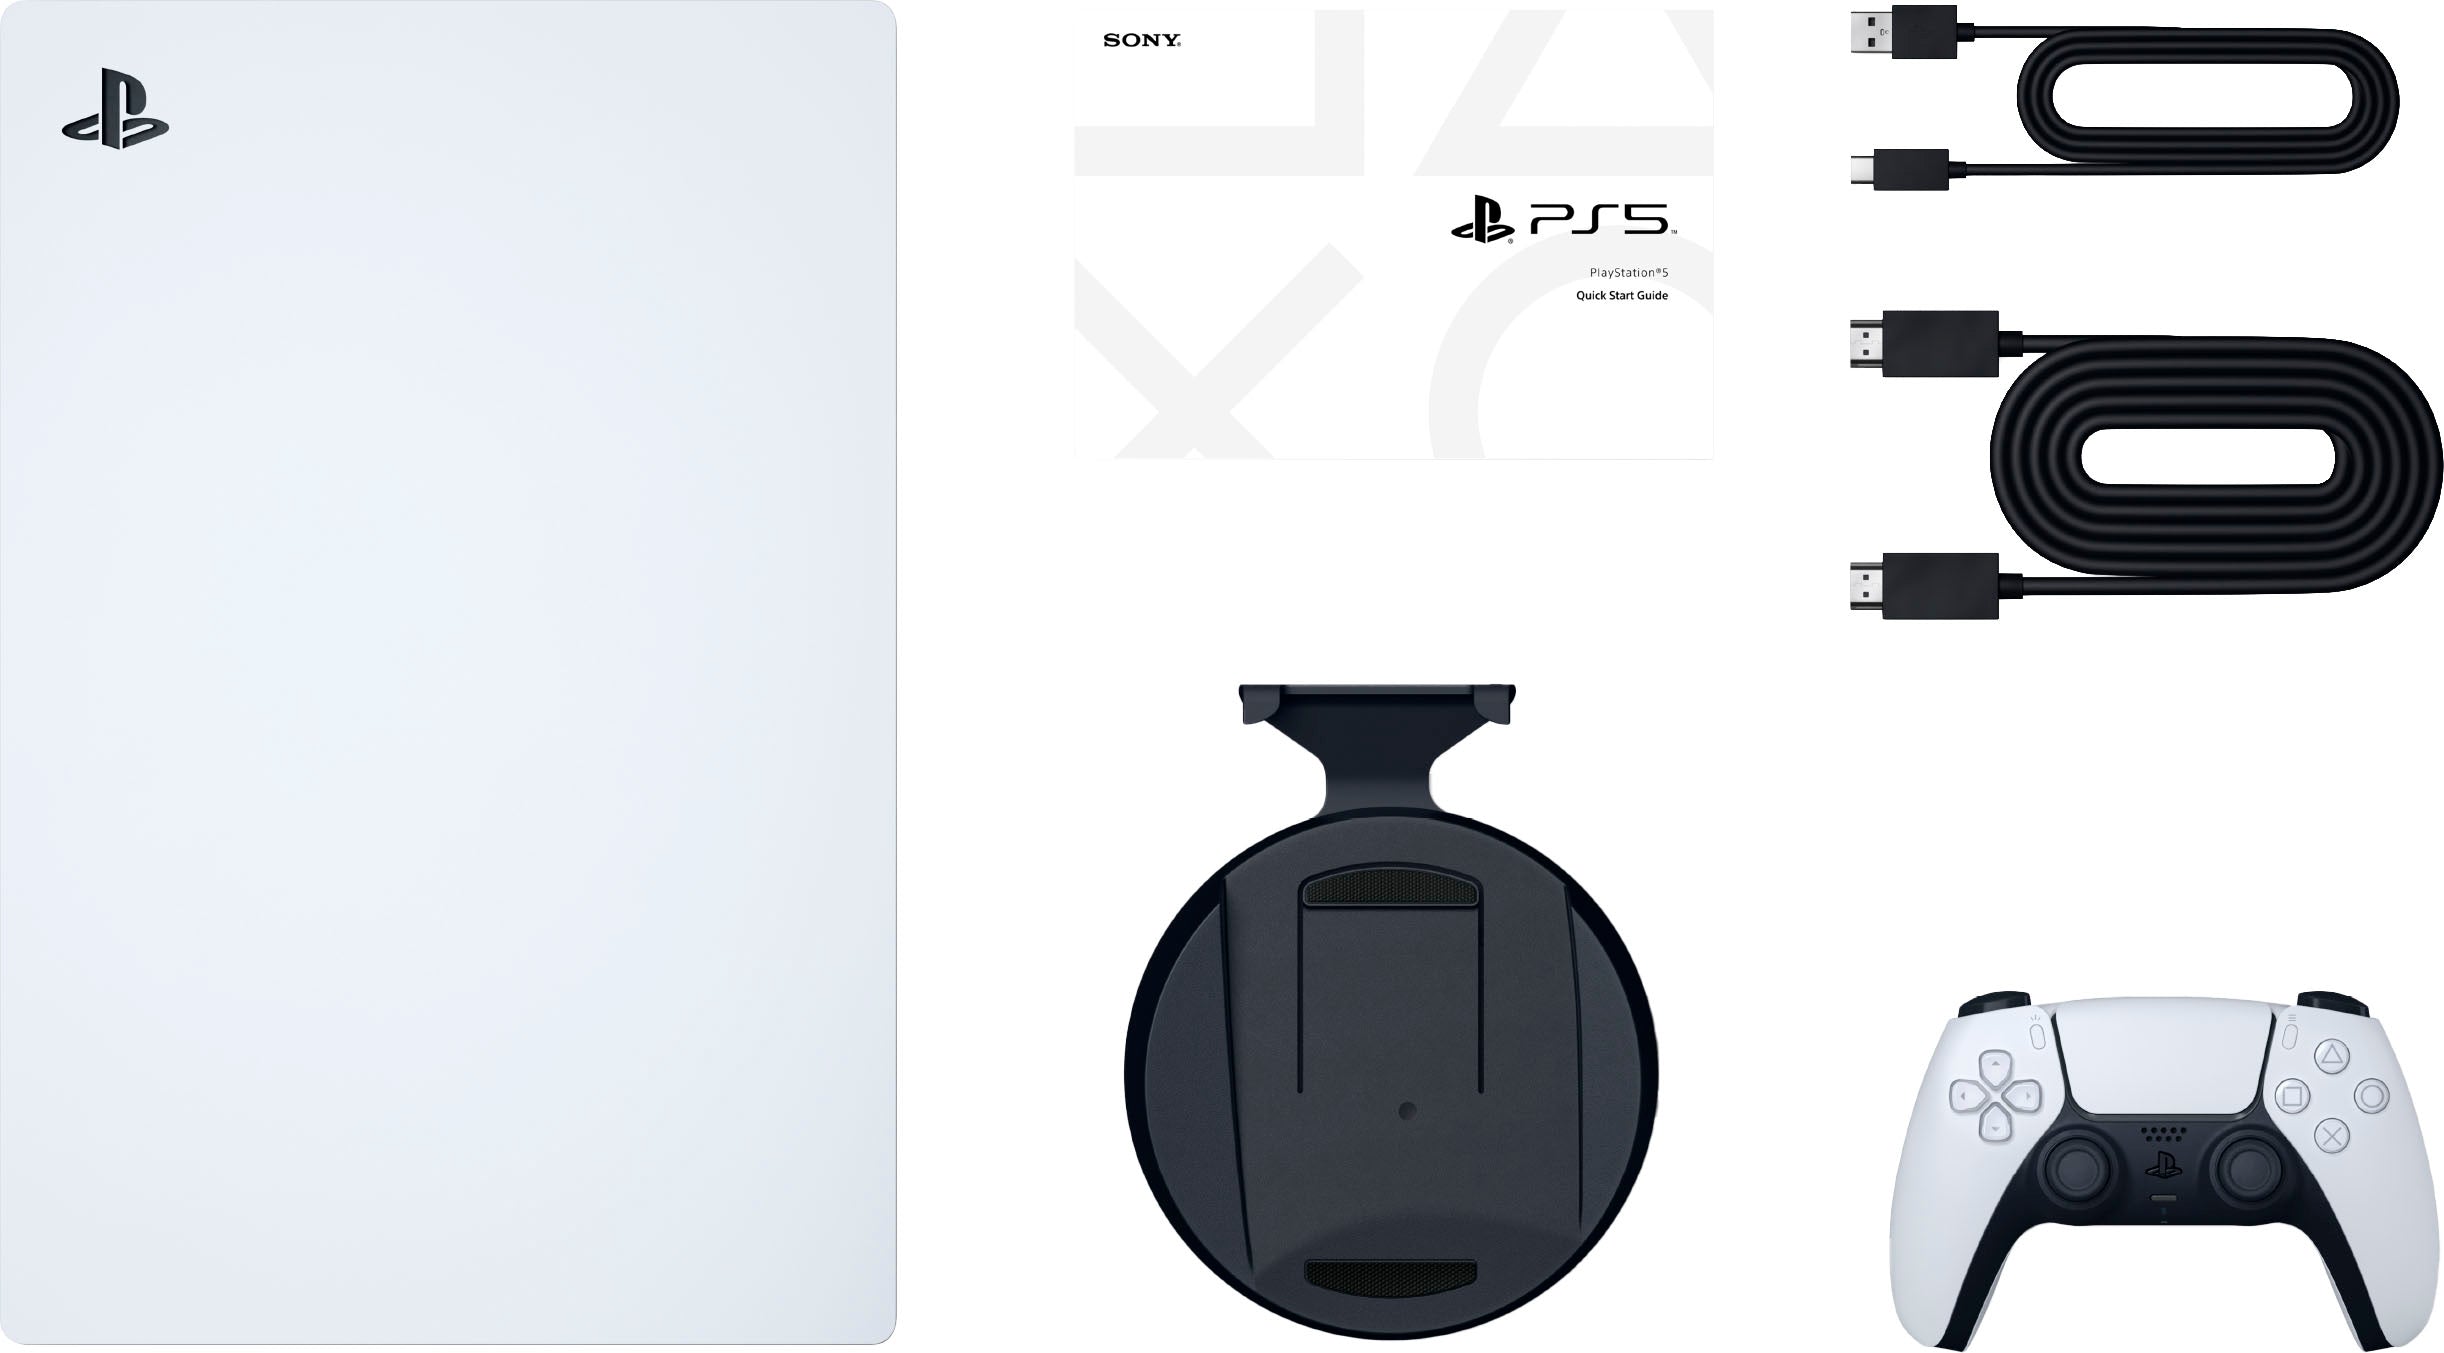 PlayStation 5 Disc Edition with Two Controllers White and Starlight Blue DualSense and Mytrix Dual Controller Charger - PS5 Gaming Console